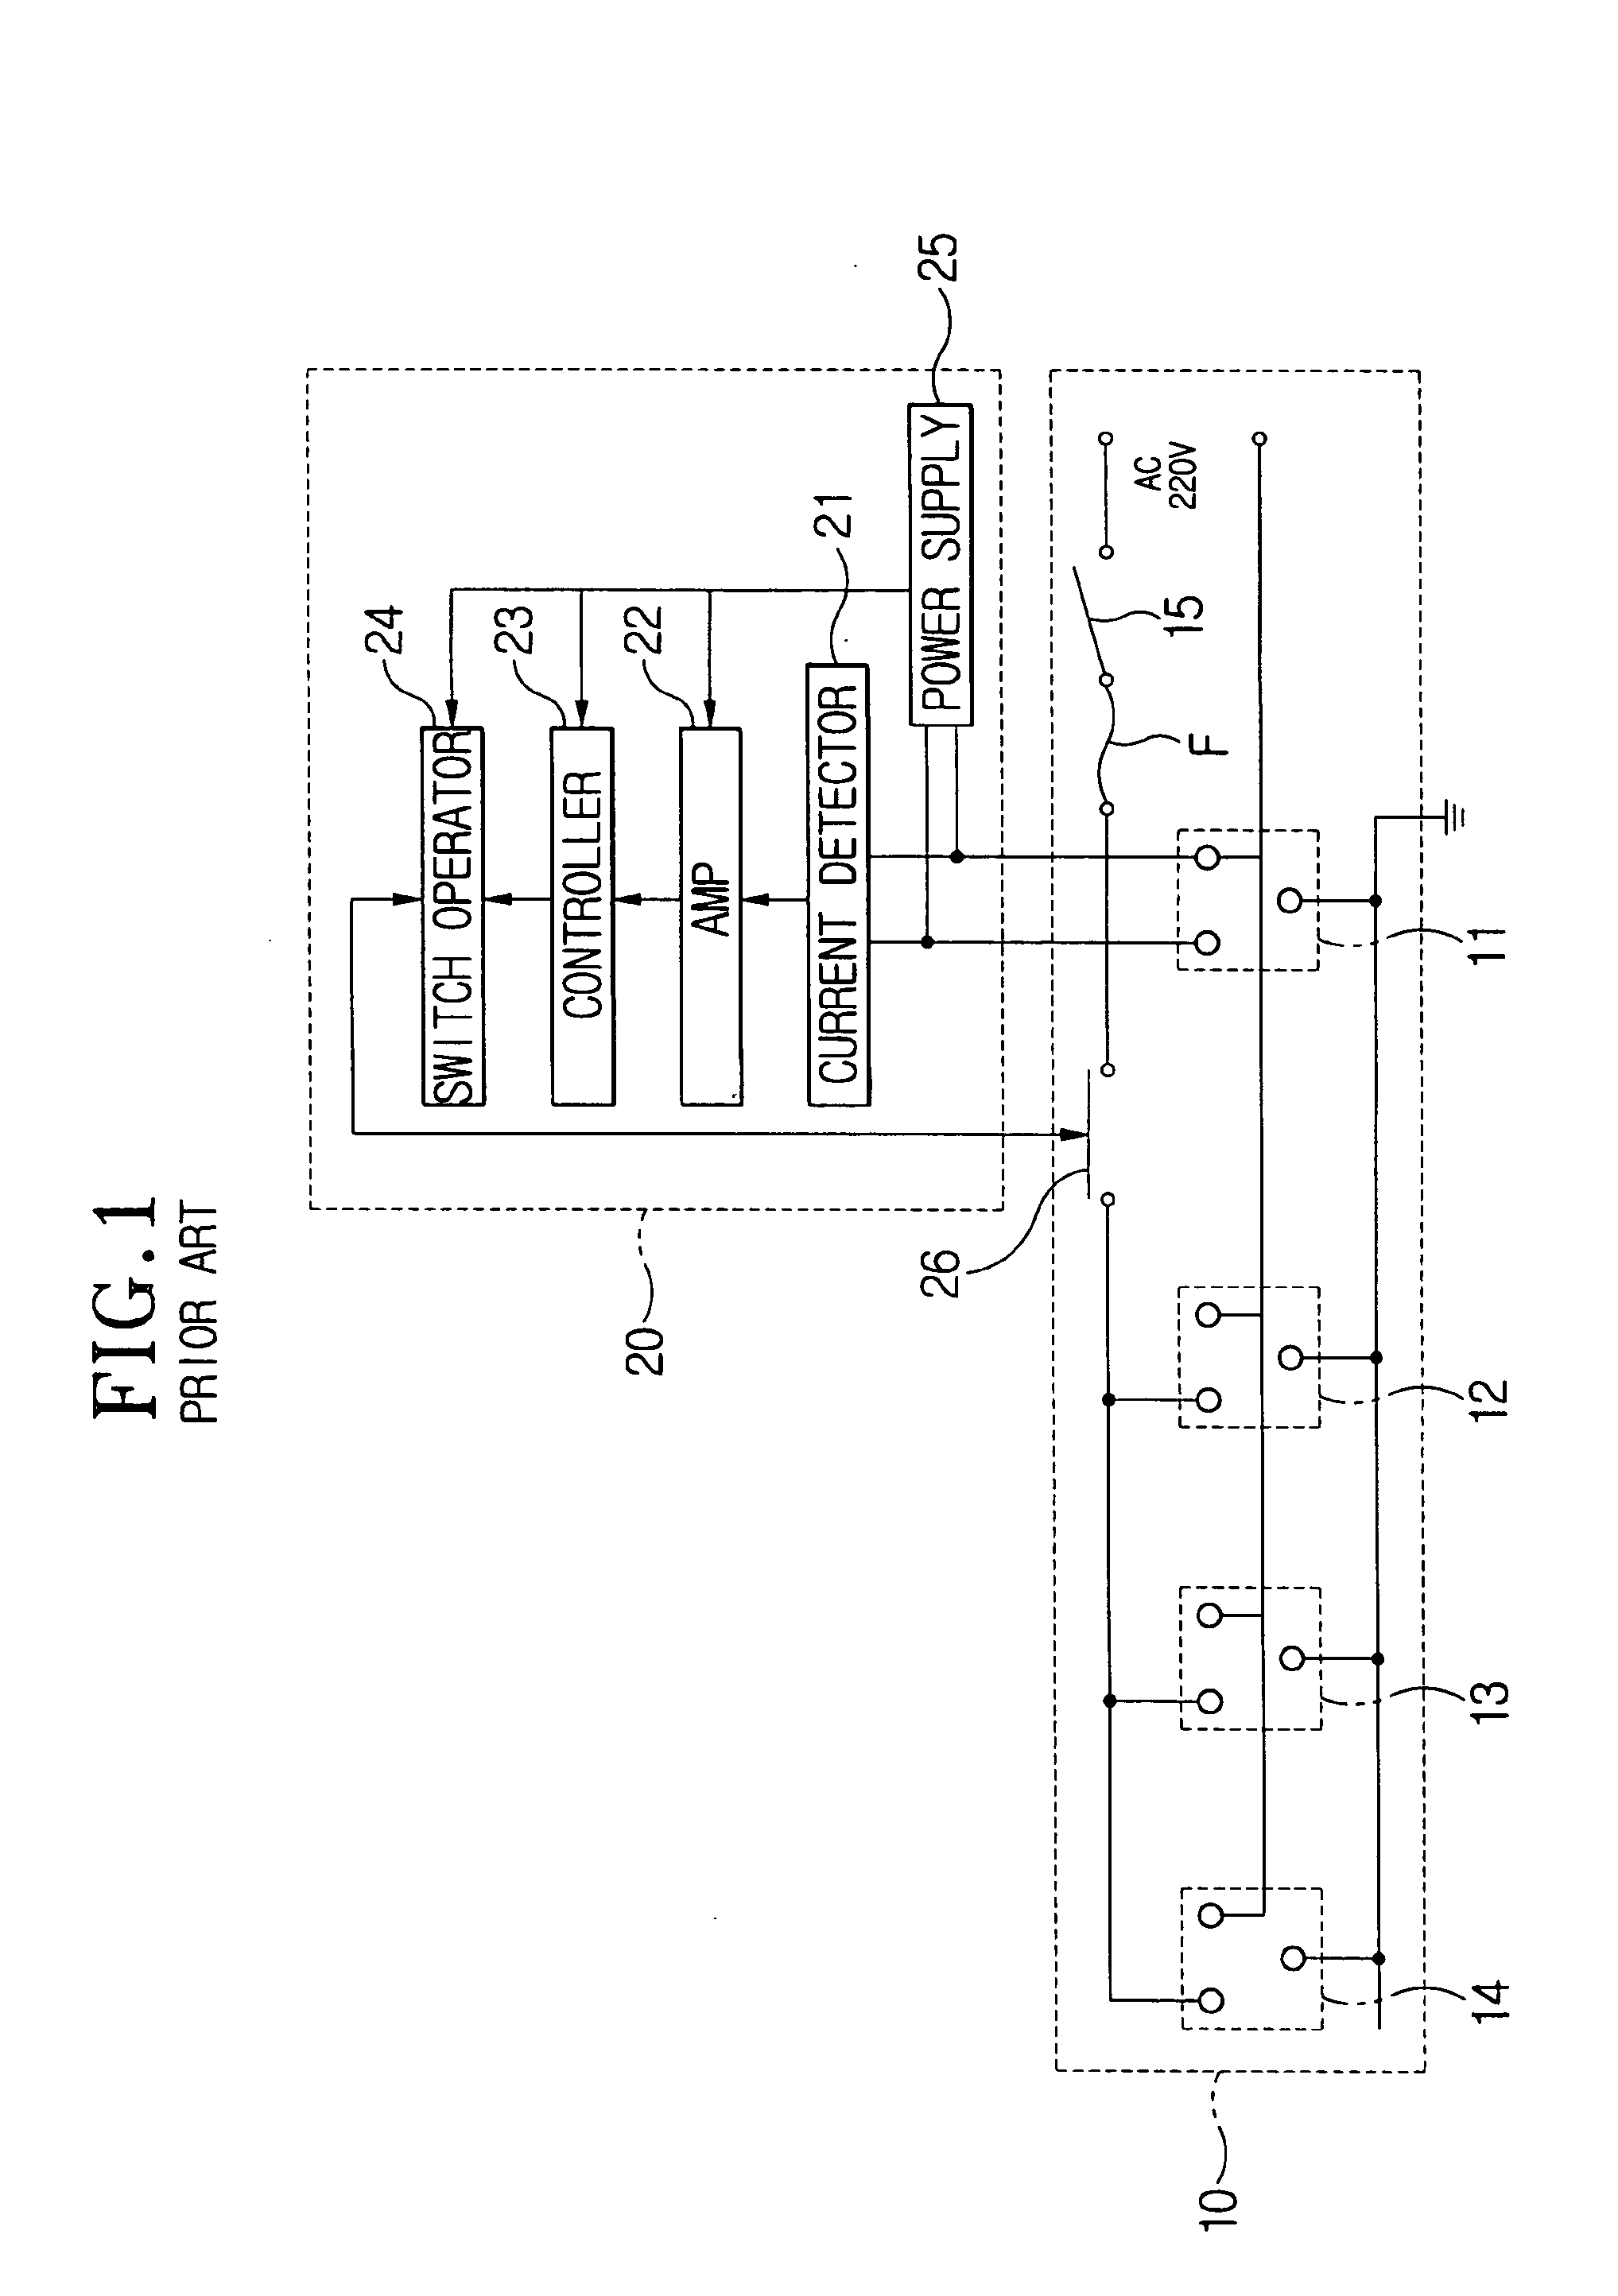 Apparatus for controlling multi-outlet power strip